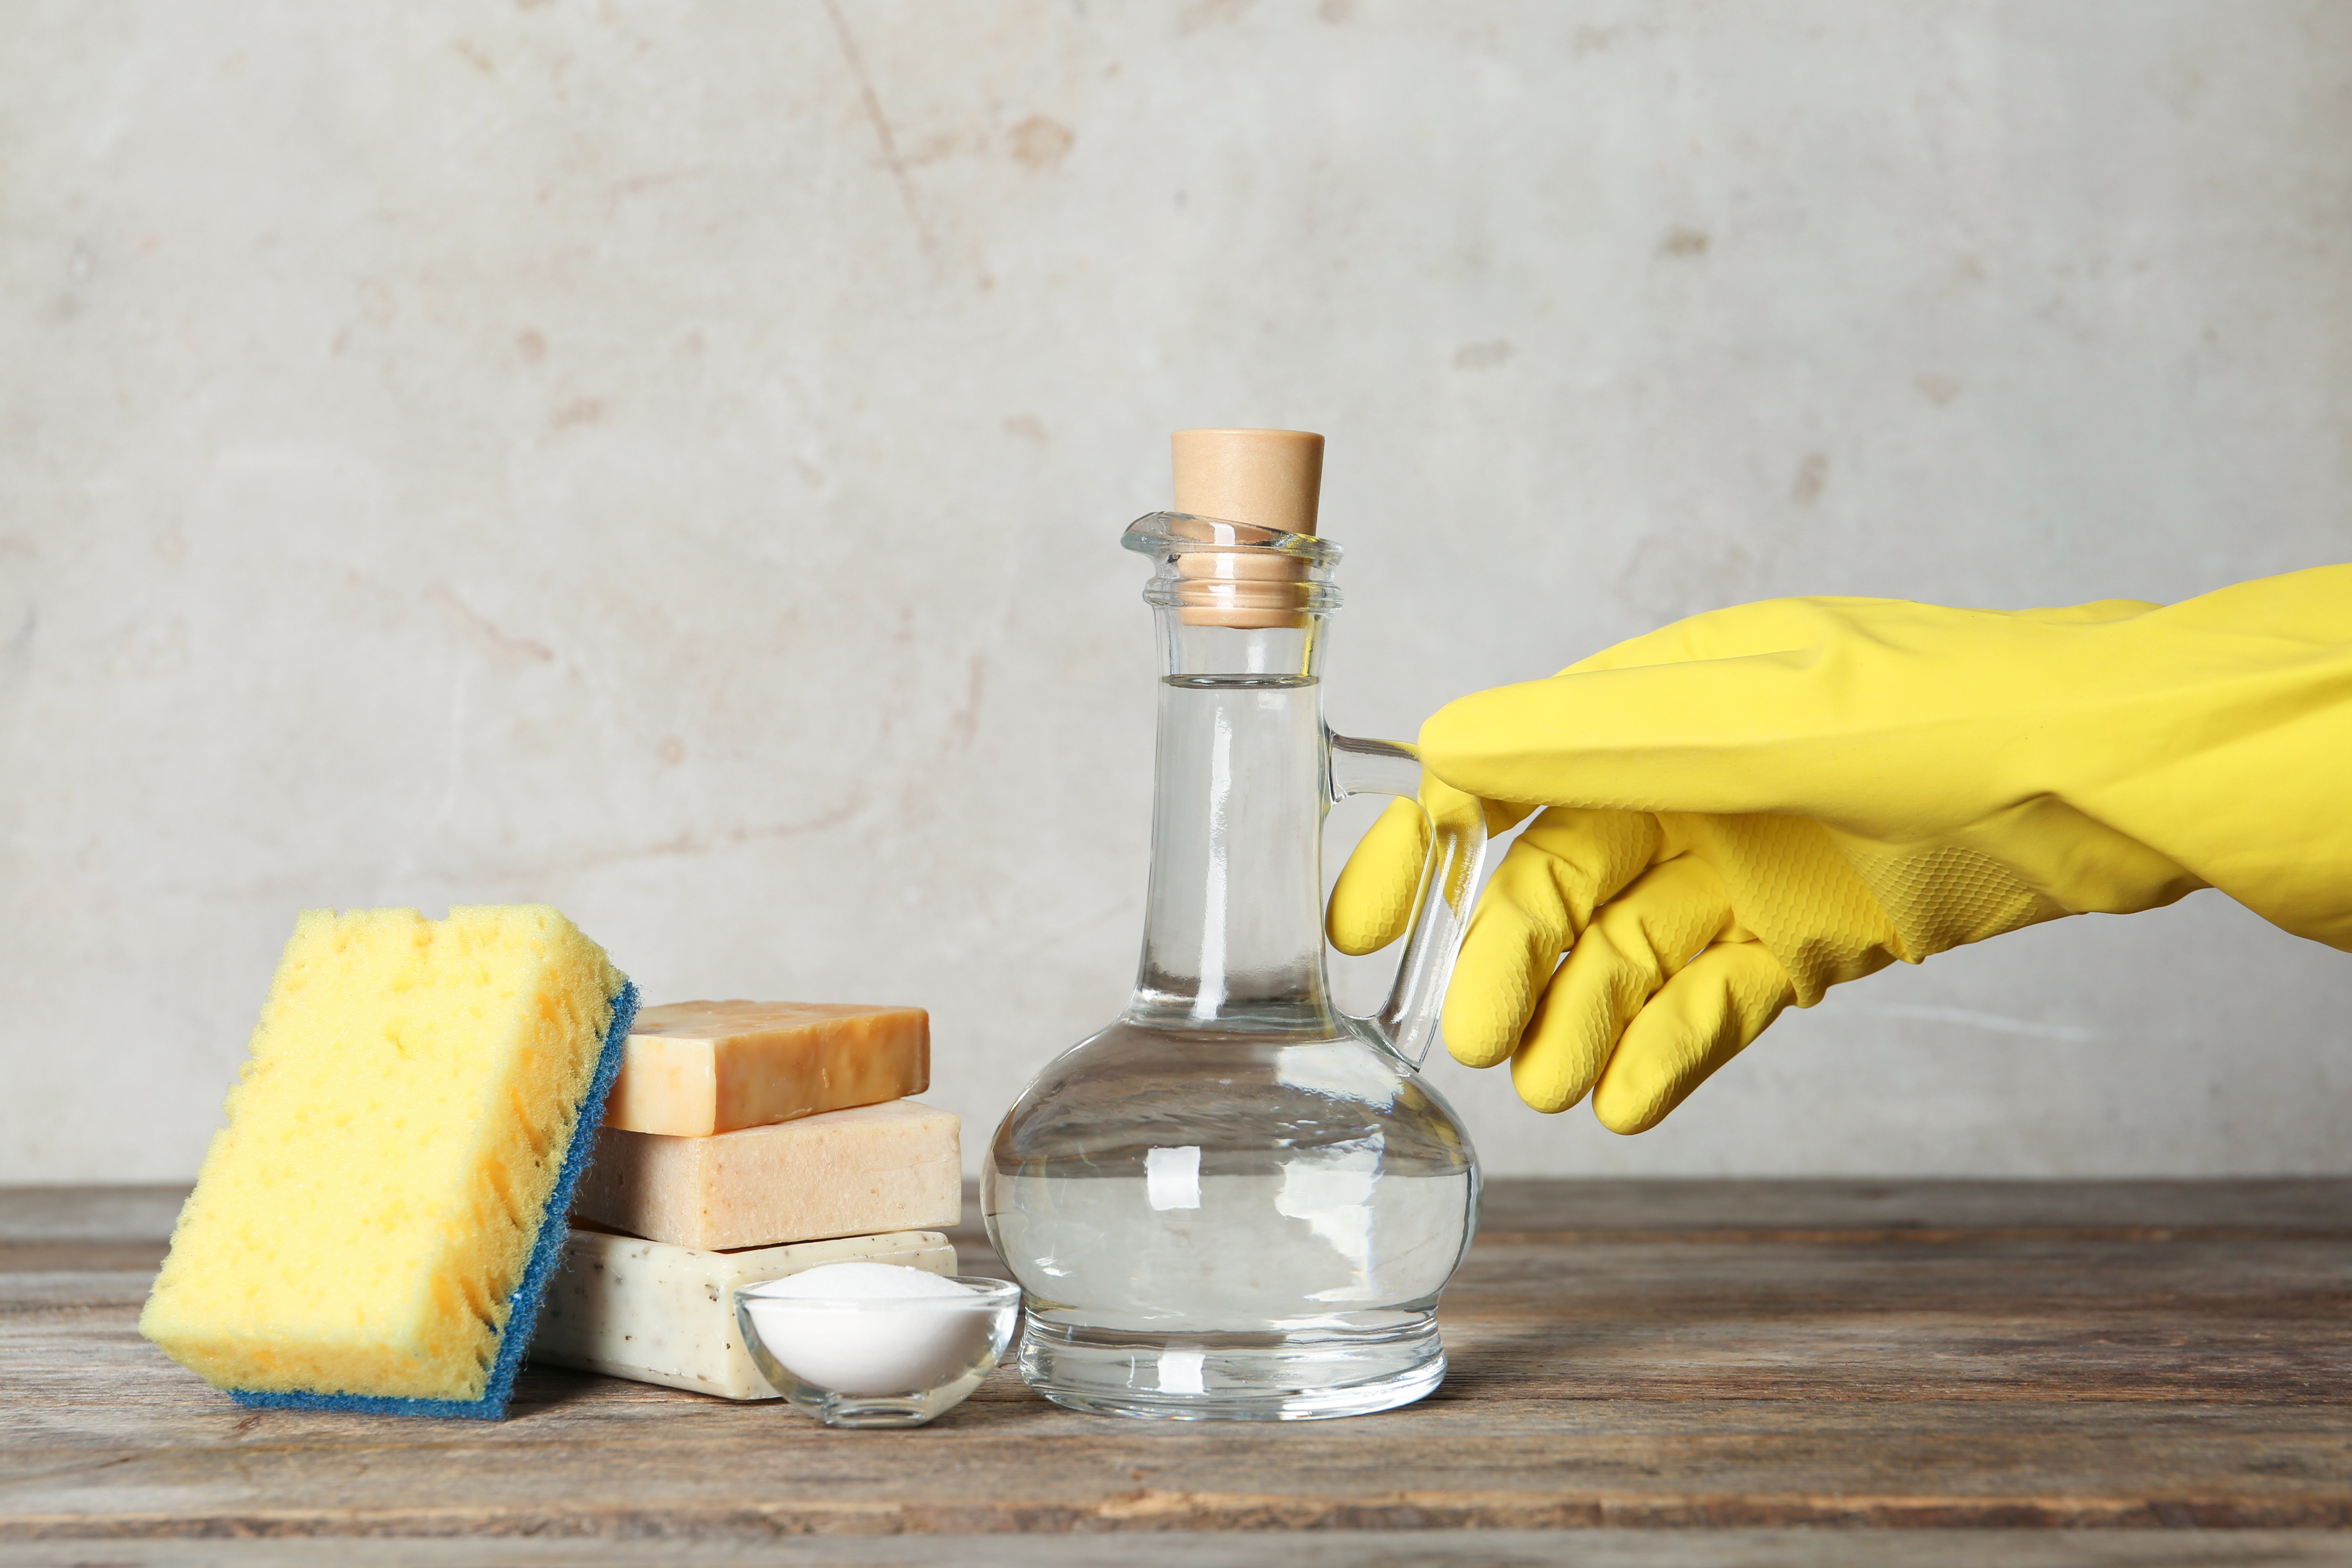 Making your own cleaning detergent